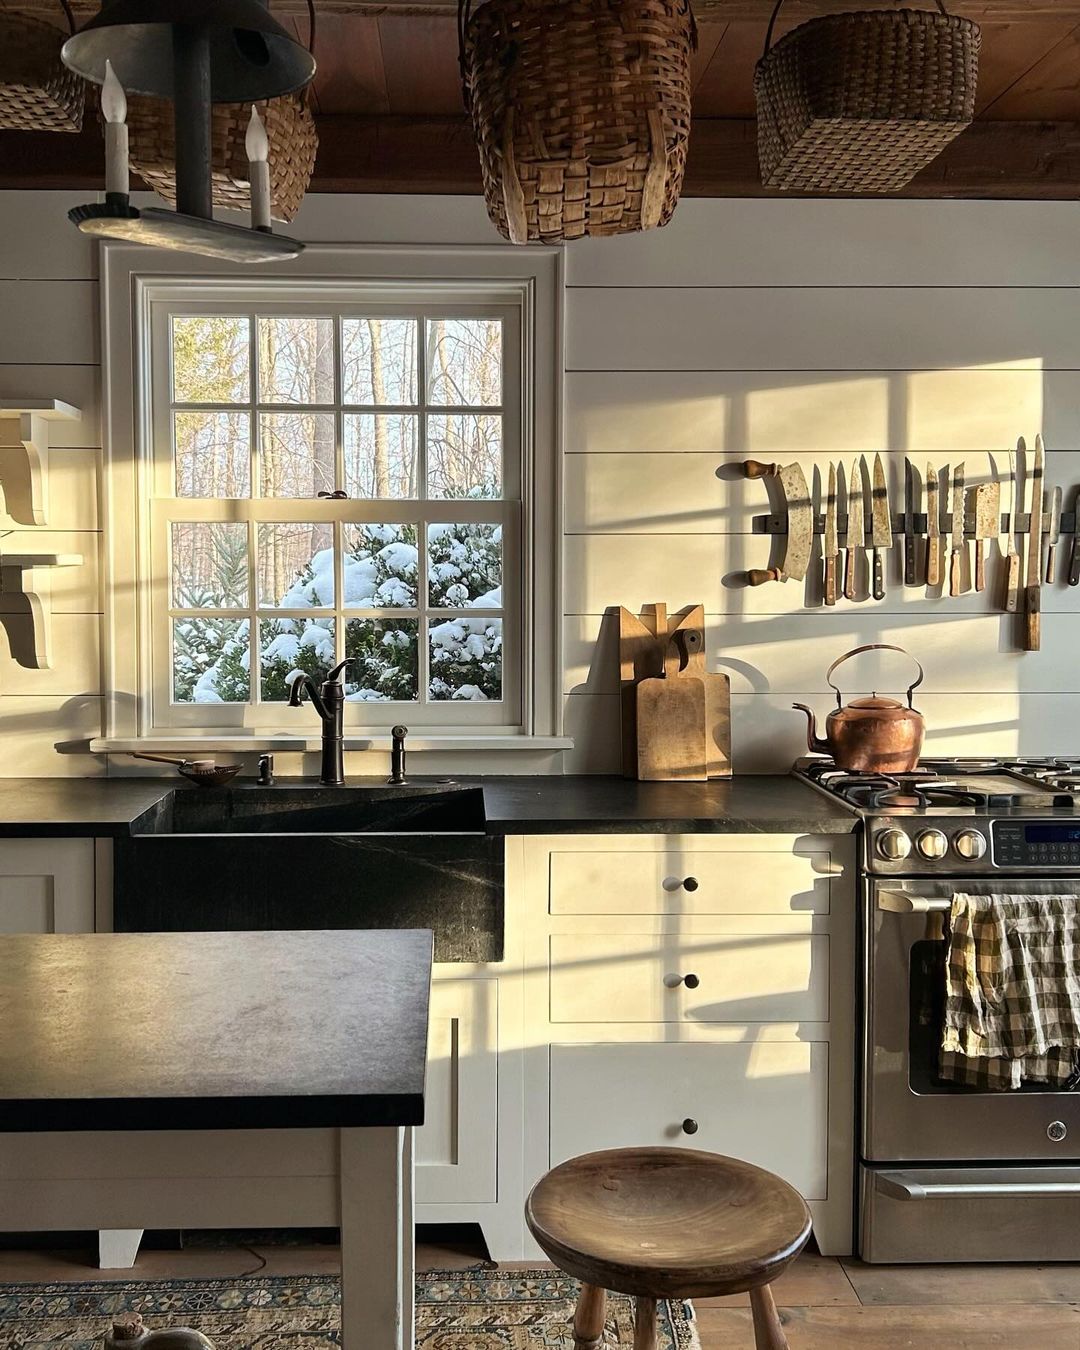 ceiling hanging baskets, a farmhouse sink, a stainless steel oven, and a neutral color scheme contribute to make this kitchen a blend of both cottage feel and modern clean line aesthetics.